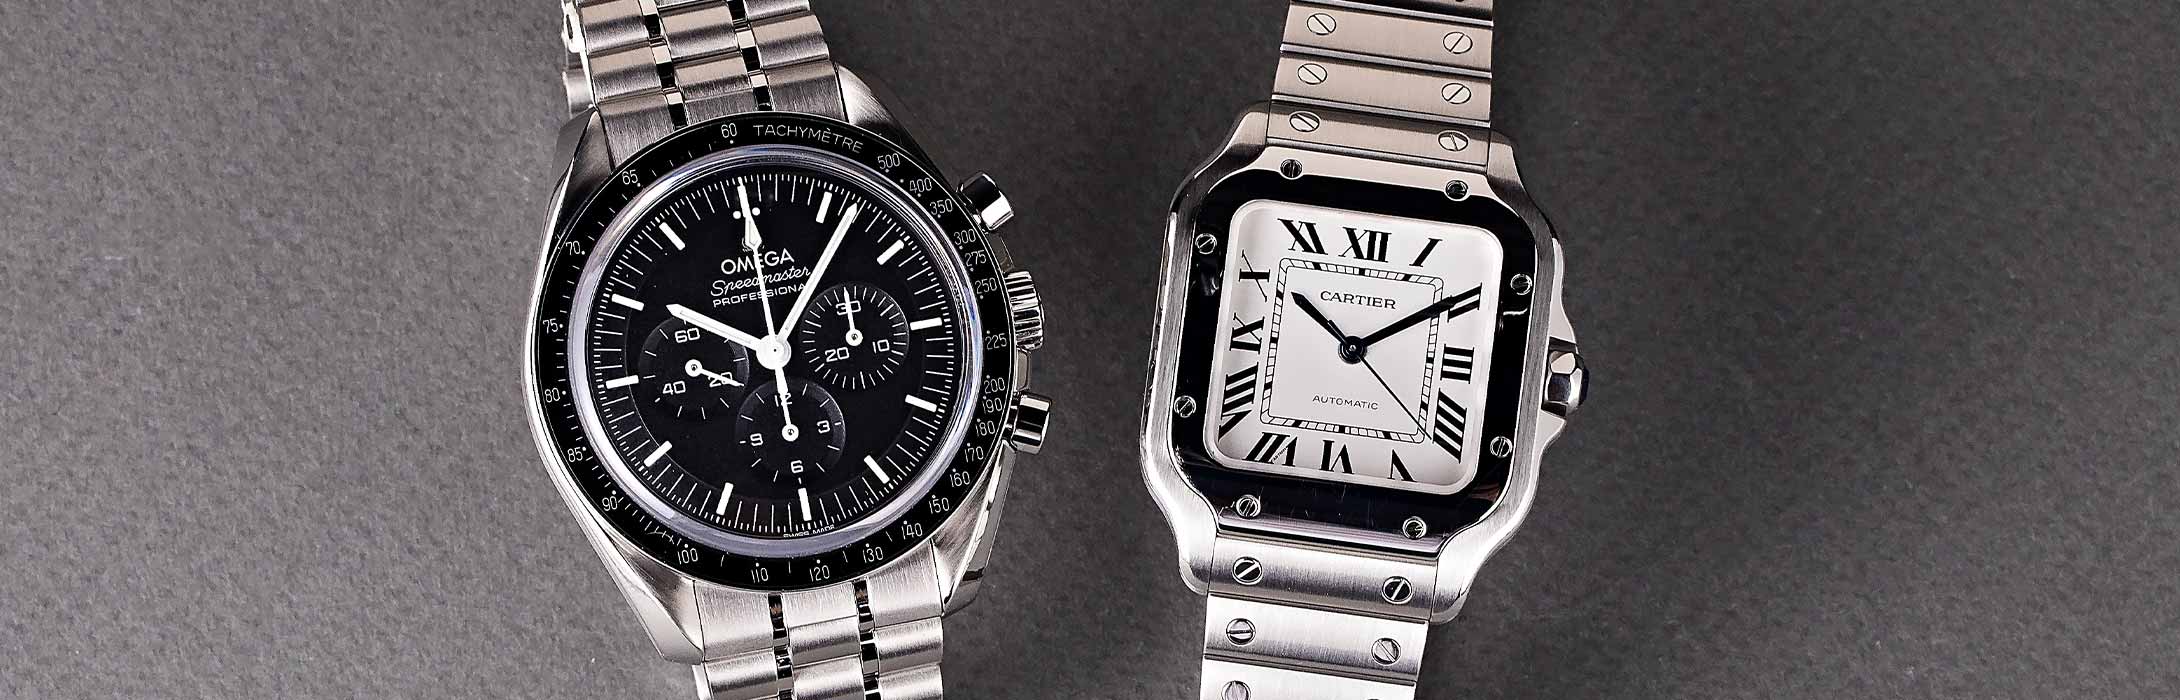 Cartier vs OMEGA Watches